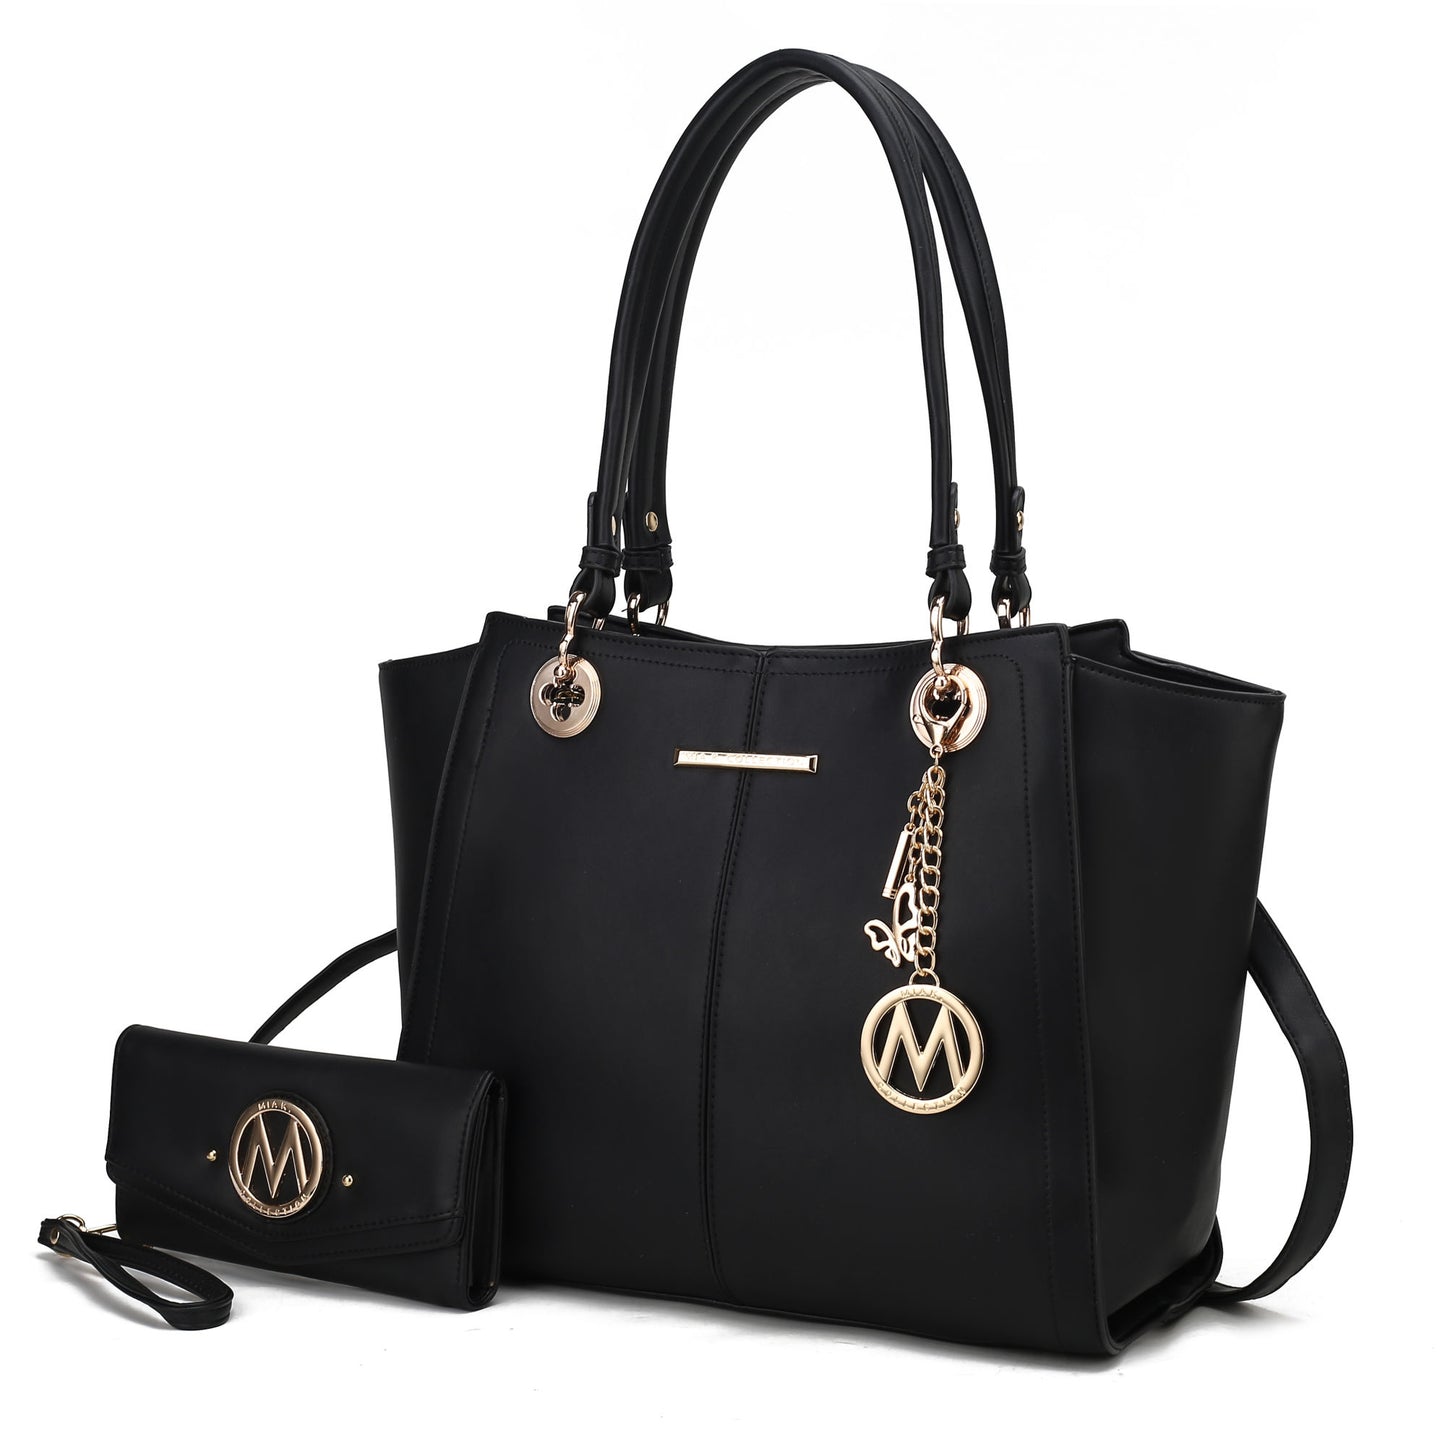 MKF Collection Ivy Vegan Leather Women's Tote Bag by Mia K with wallet -2 pieces